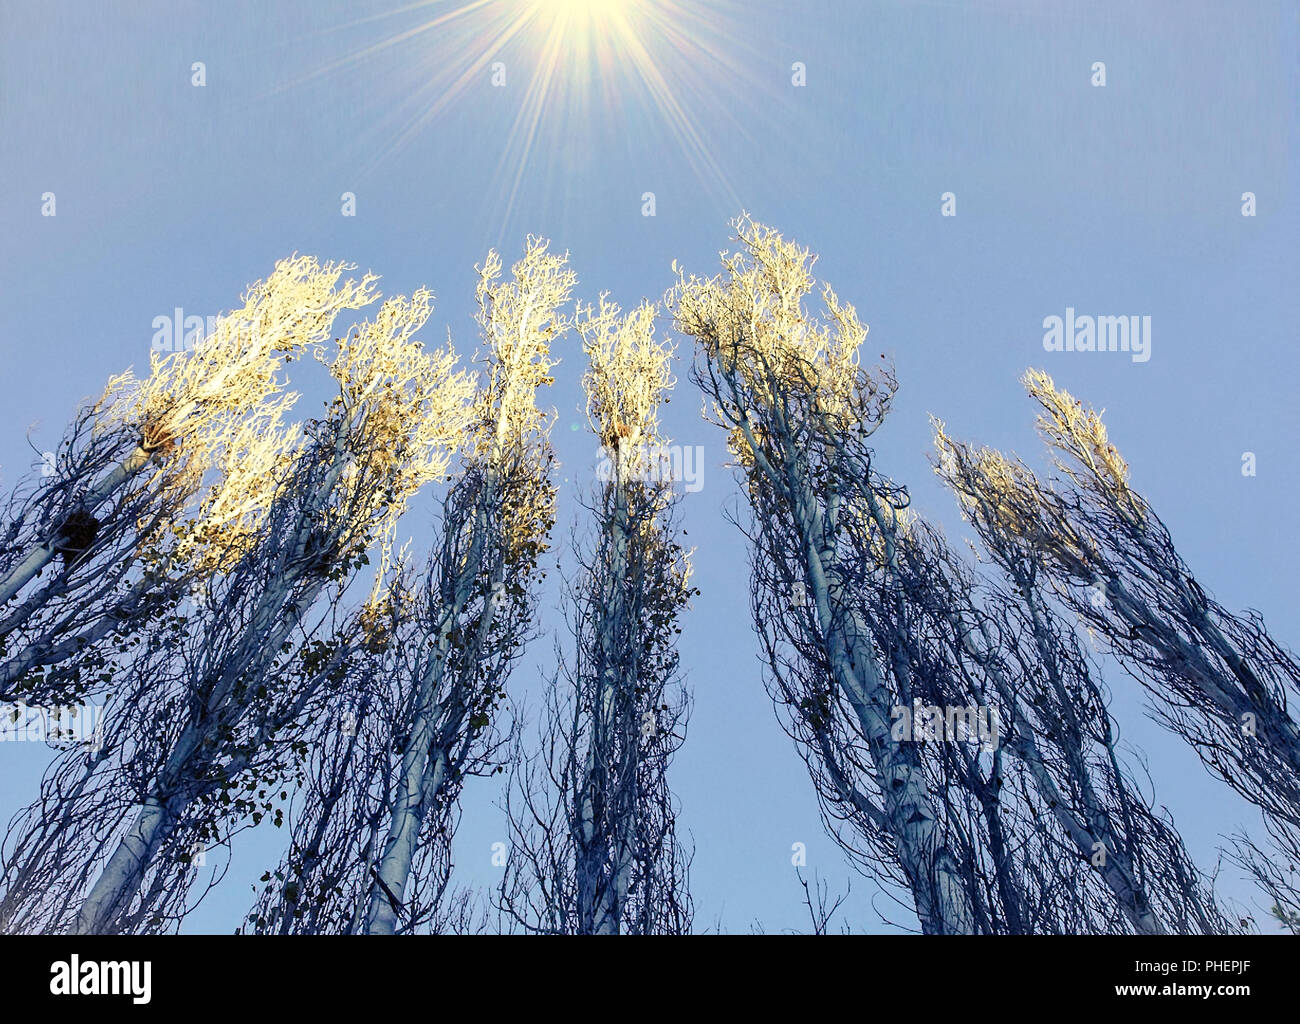 Cypress trees. Isolated.  Looking up towards the tips of sunkissed Cypress trees with a blue  clear sky in the background. Stock Image. Stock Photo